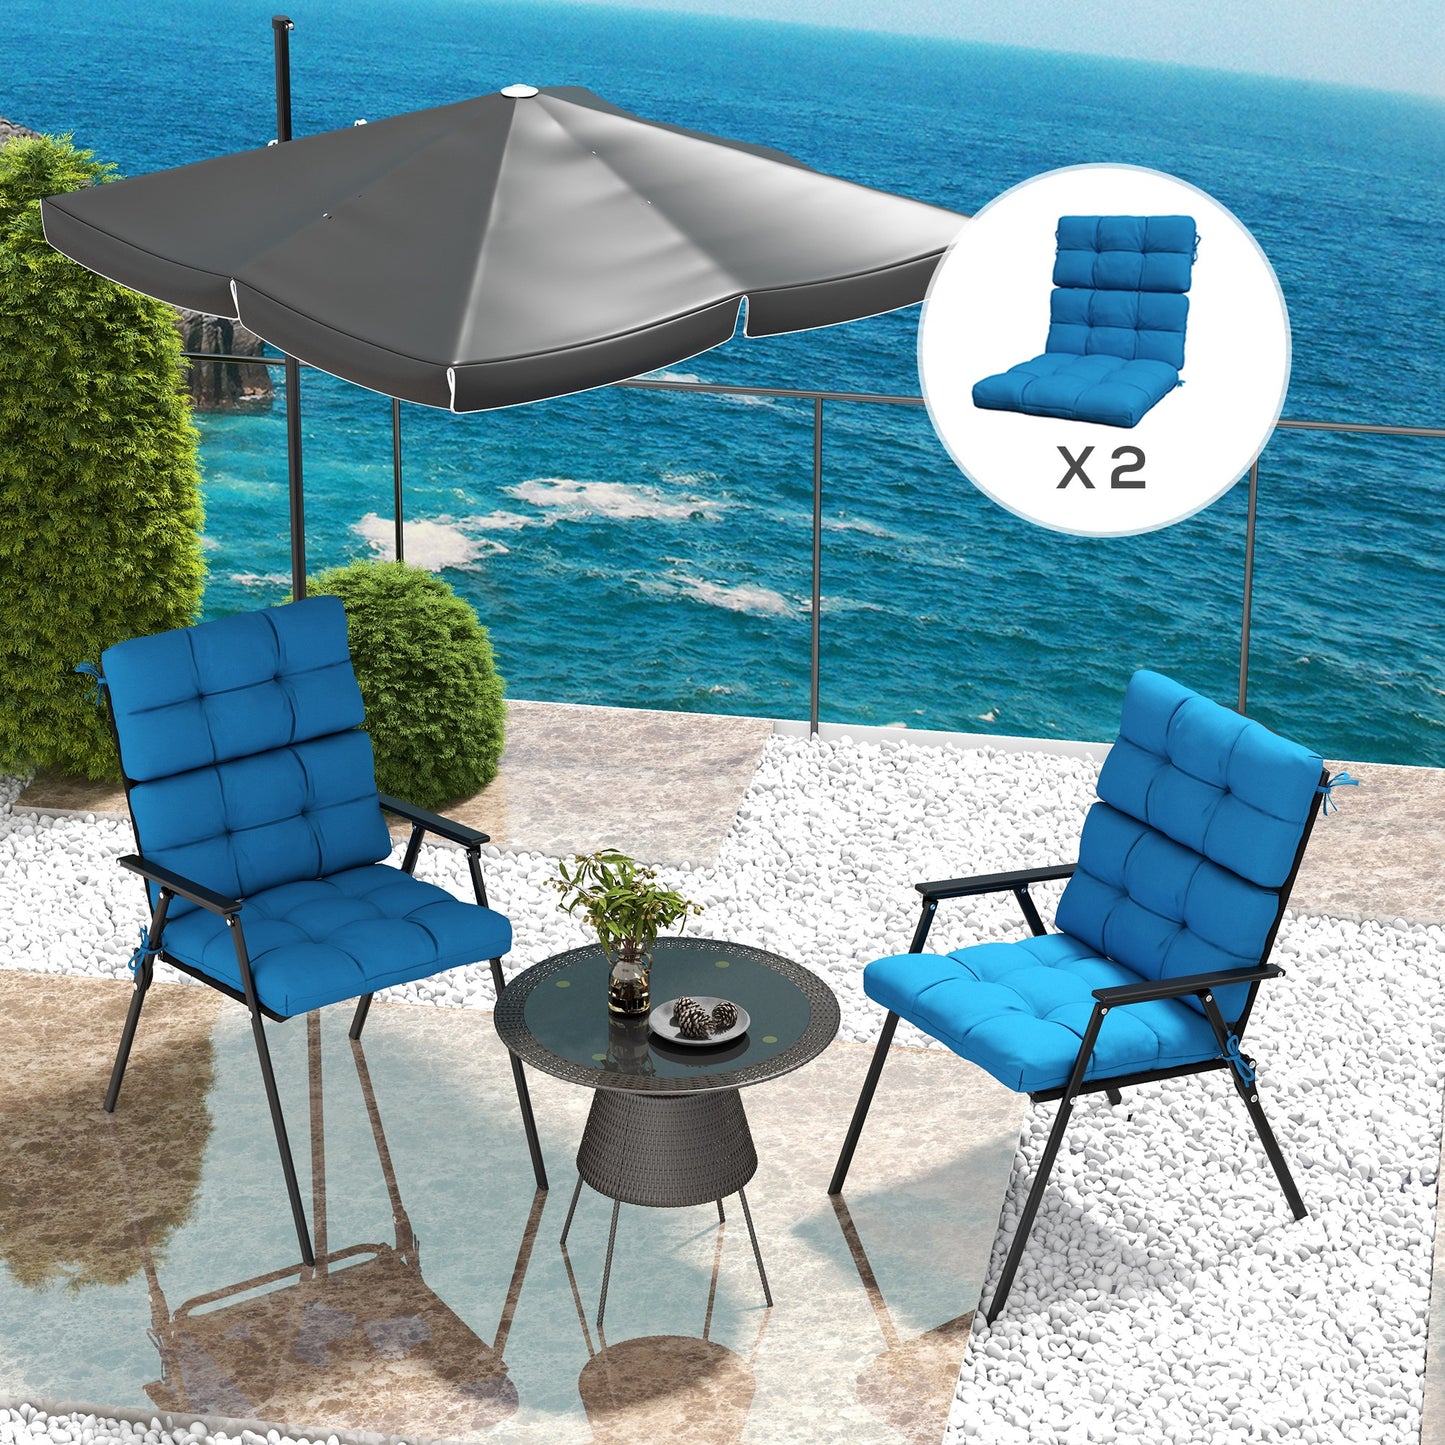 Outsunny Garden Seating Comfort: Plush Turquoise Cushions with Backrest Ties for Patio Bliss